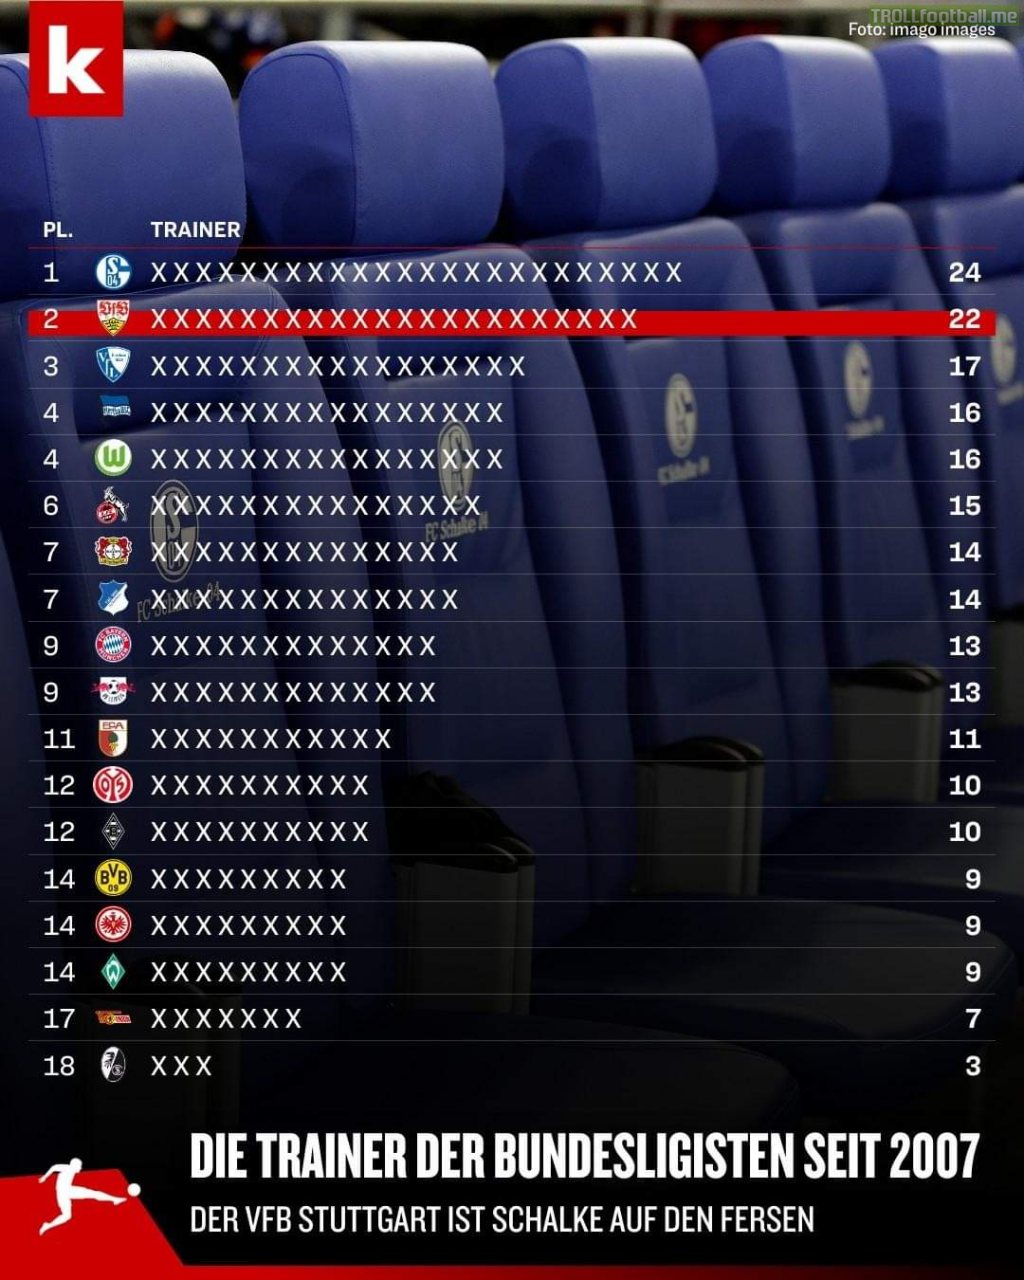 Number of coaches at each Bundesliga team since 2007